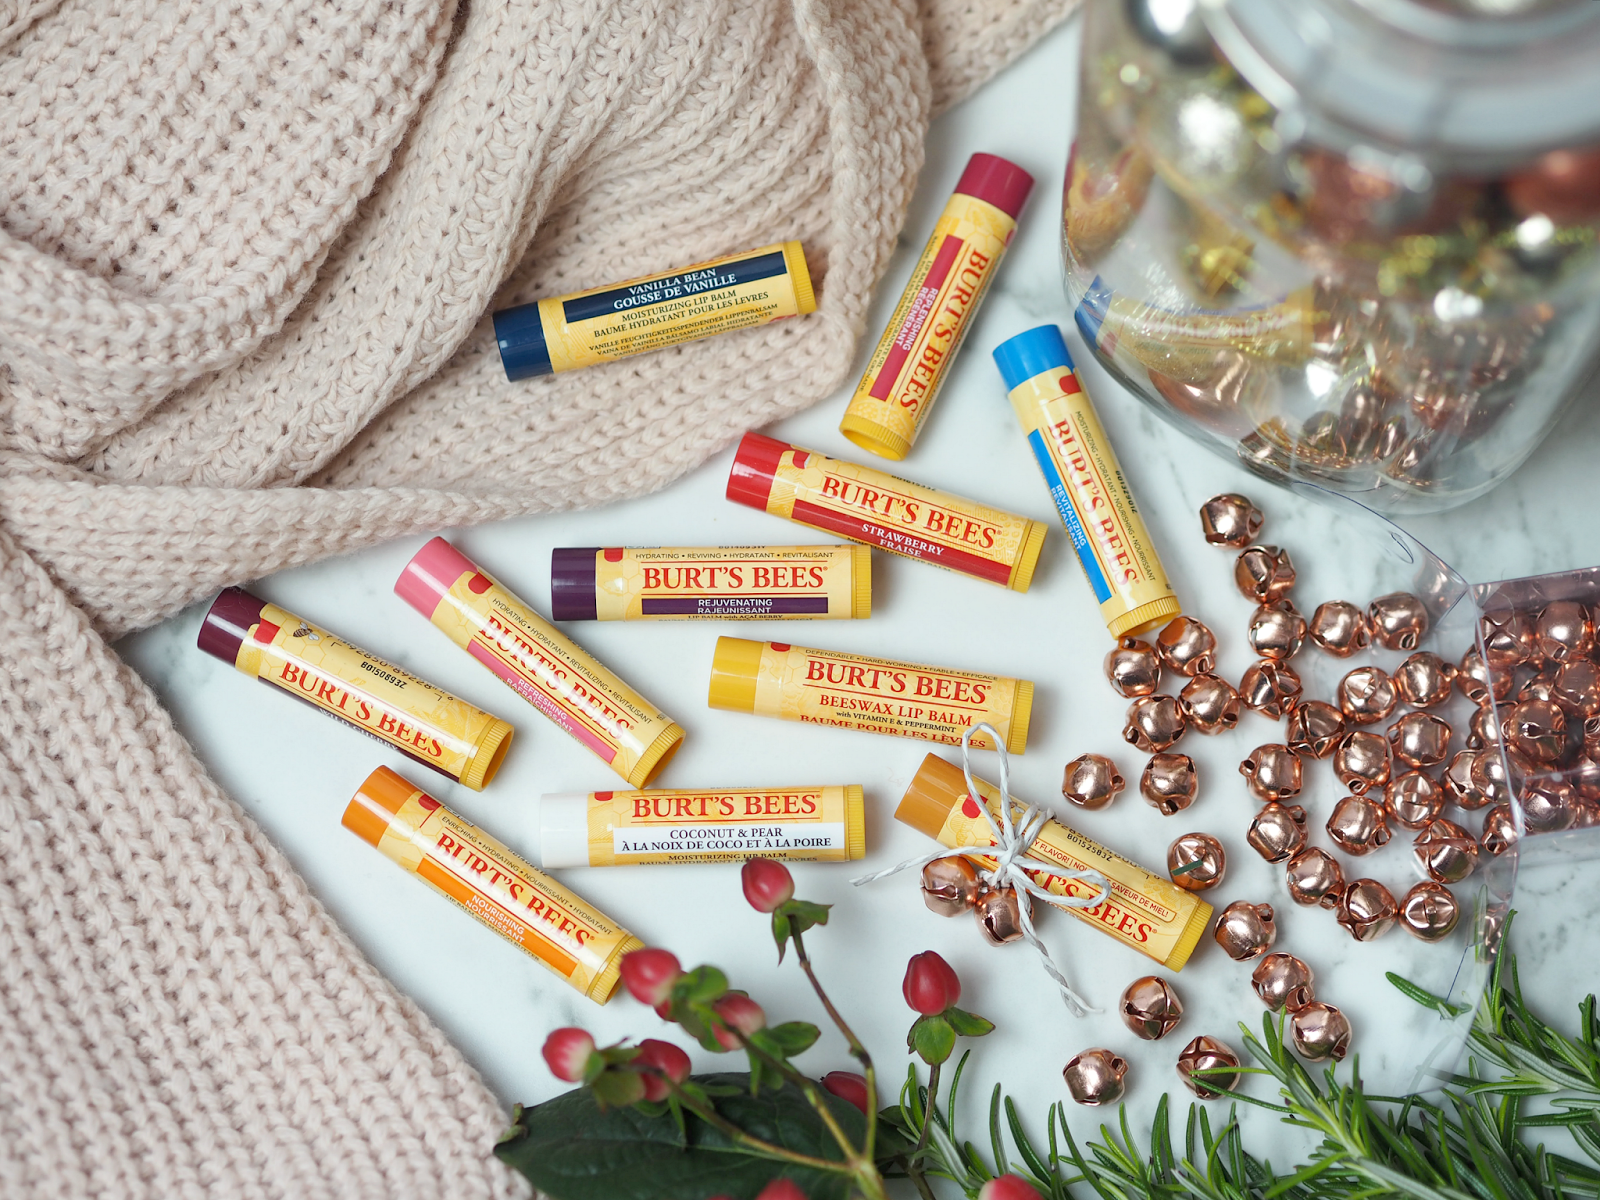 Ten Things To Do With Your Burt?s Bees Balm This Christmas (Apart From Putting It On Your Lips!)